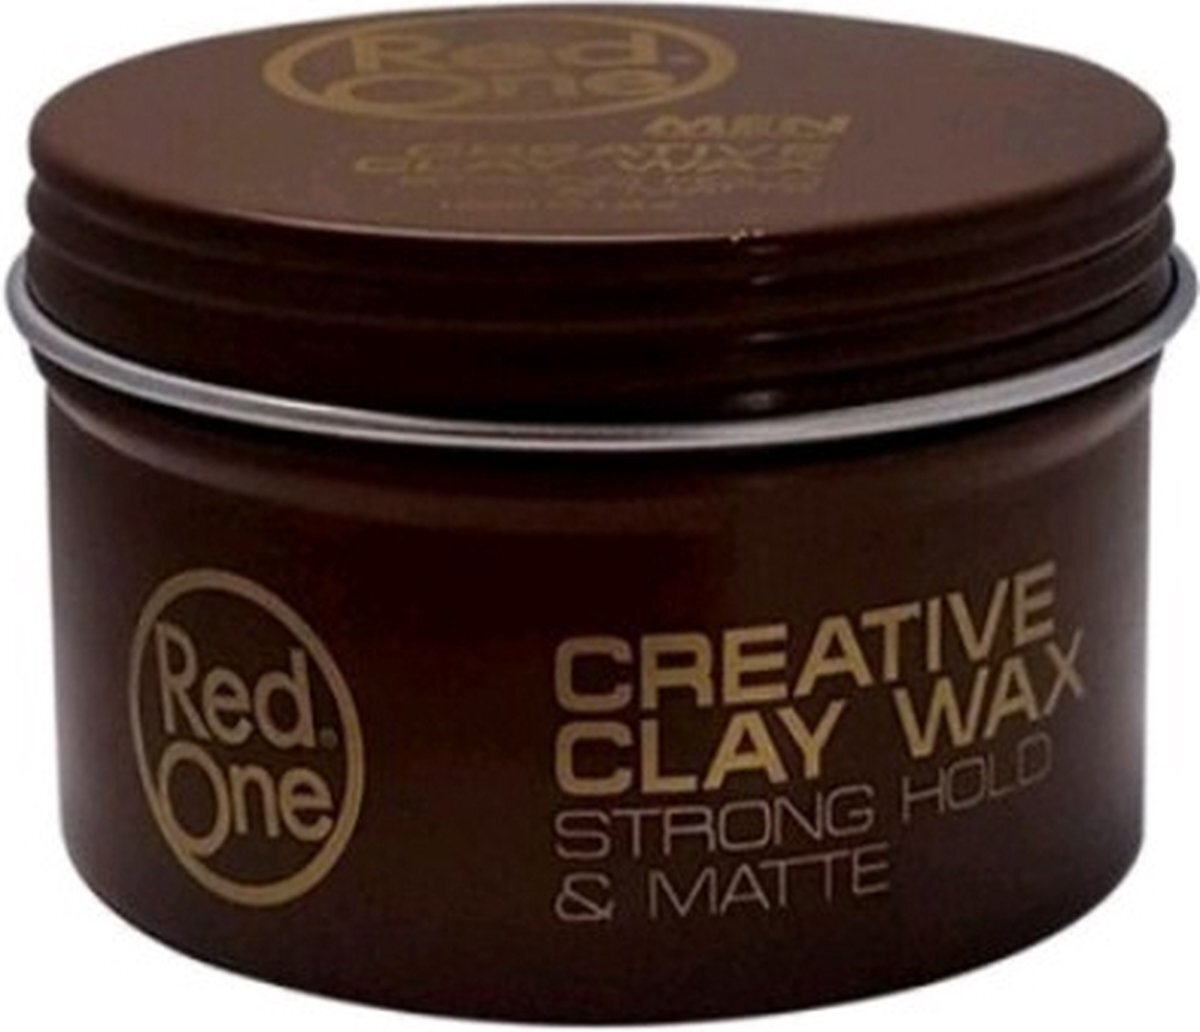 Redone Styling wax Red One Men Creative Clay Wax Strong Hold and Matte 100 ml